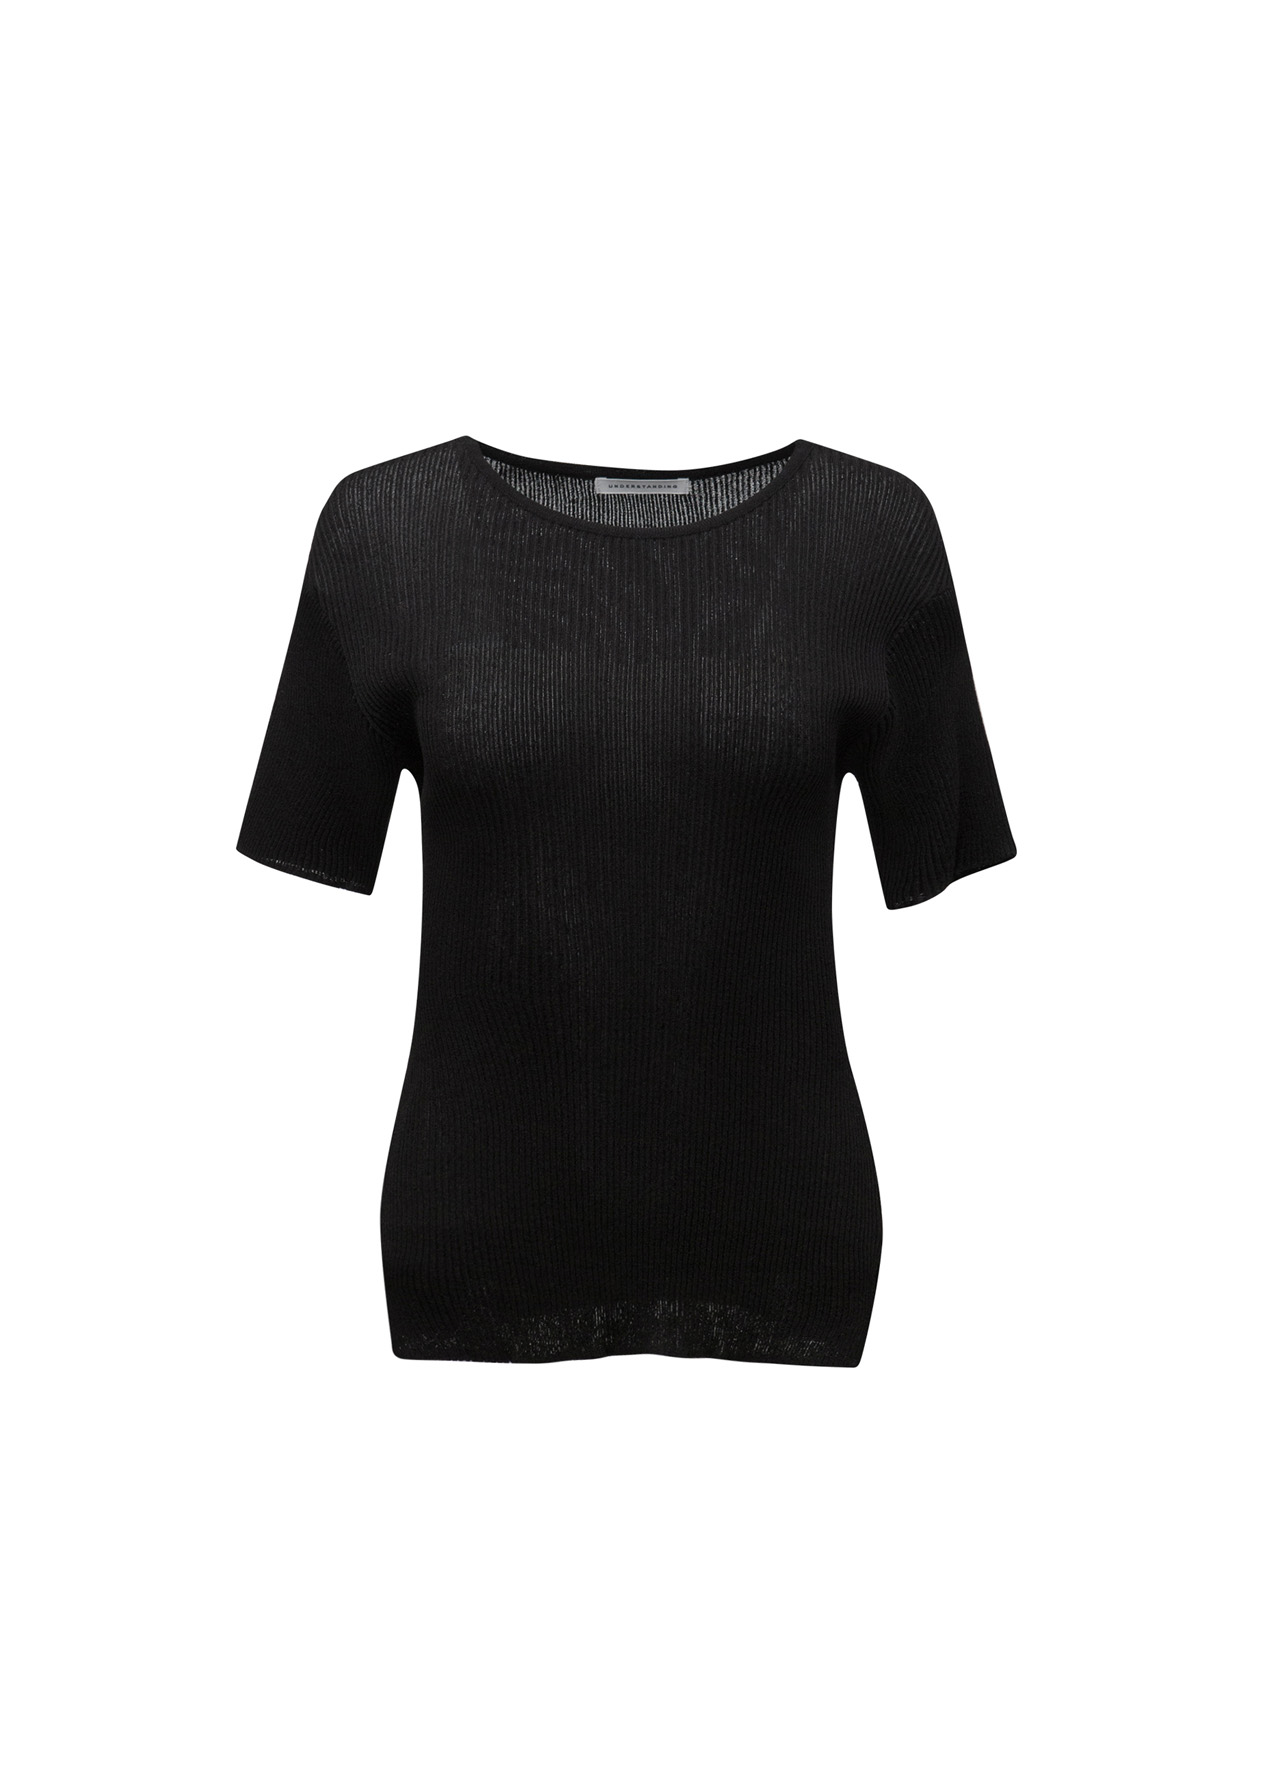 22 See-through short-sleeved knit